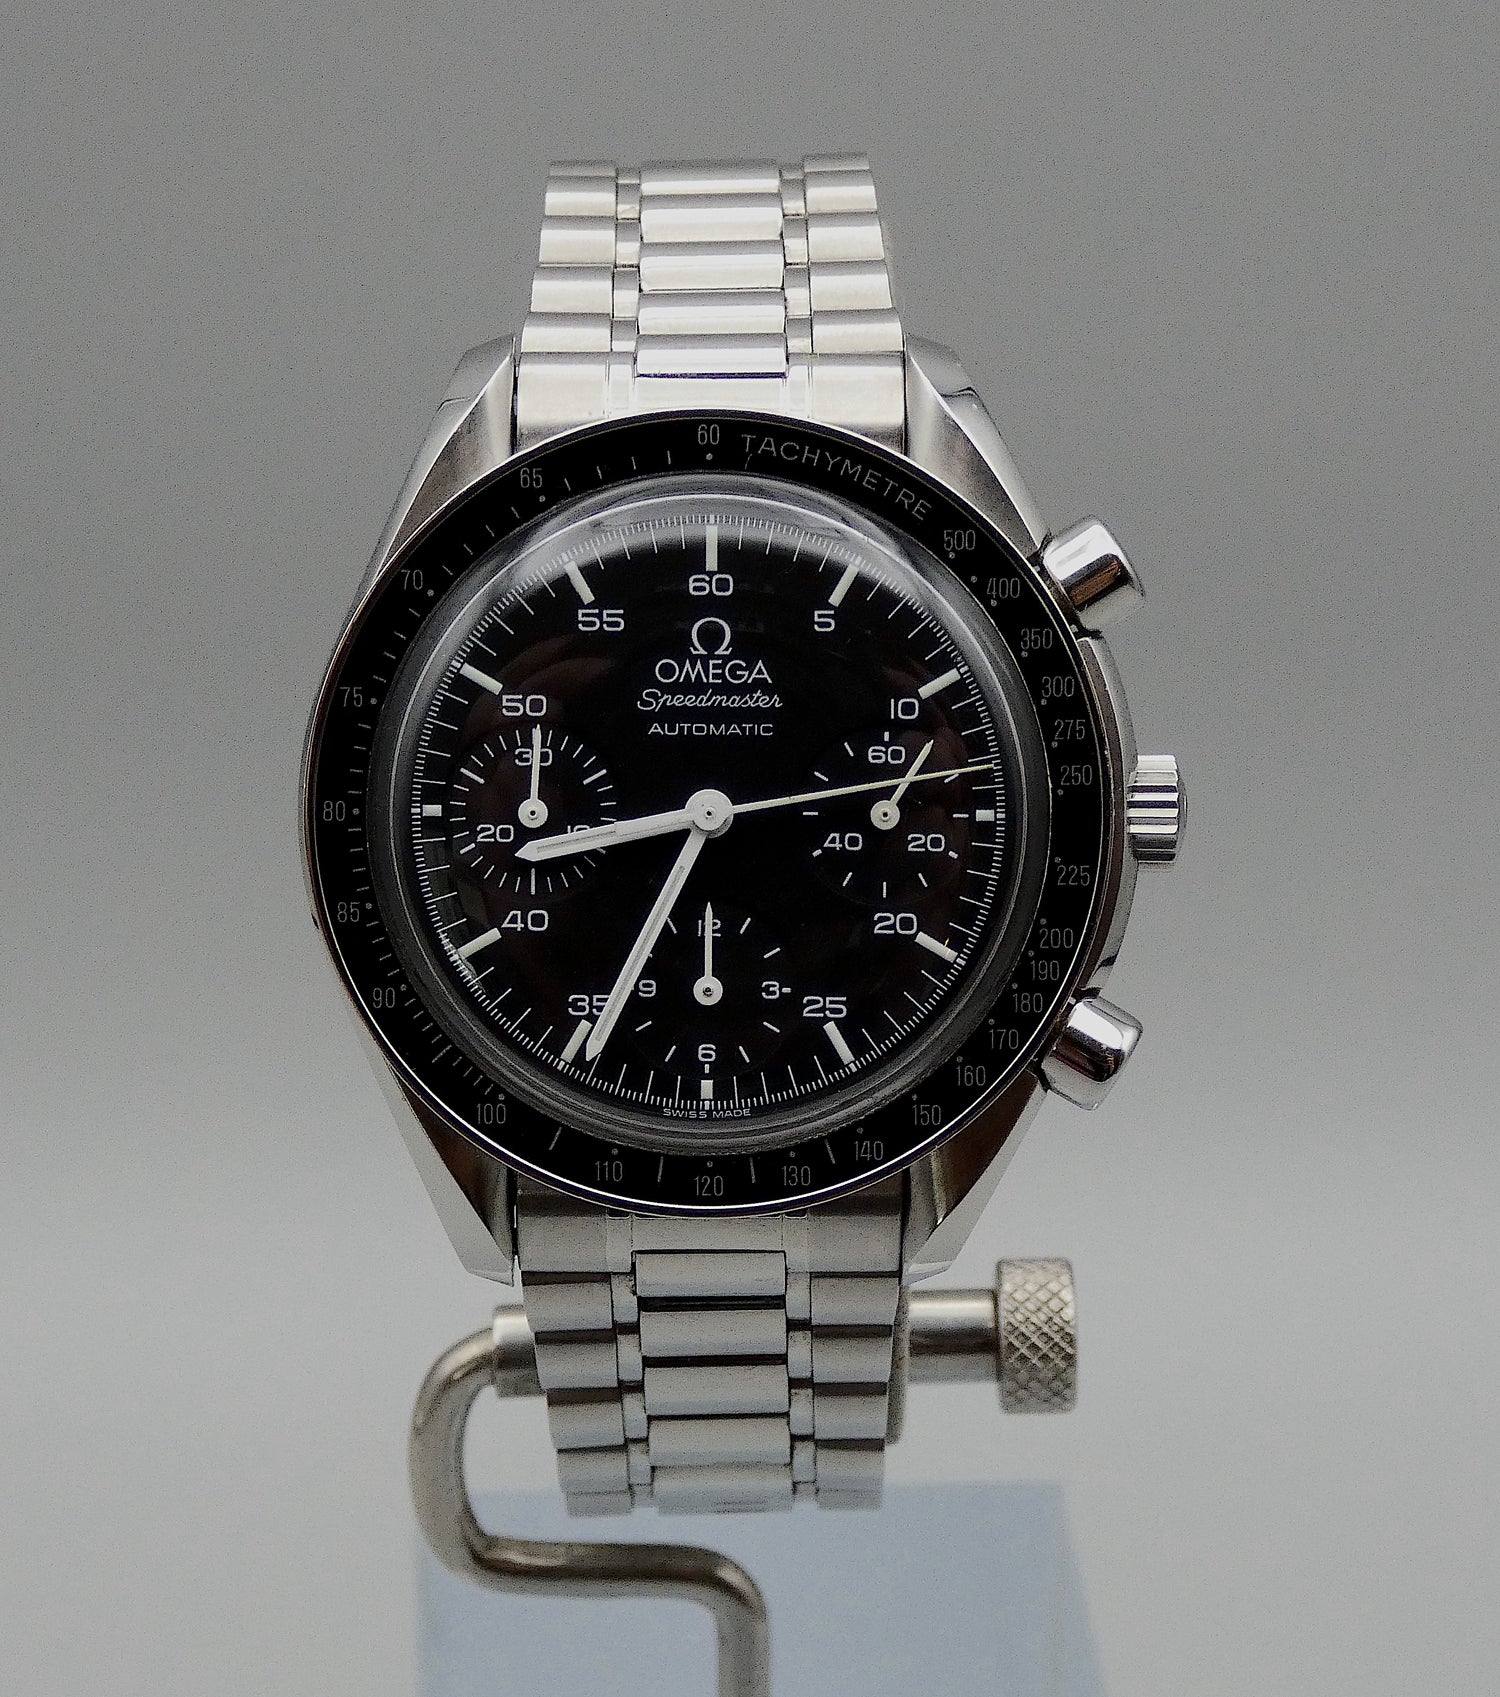 SOLD Speedmaster Reduced / Mint condition